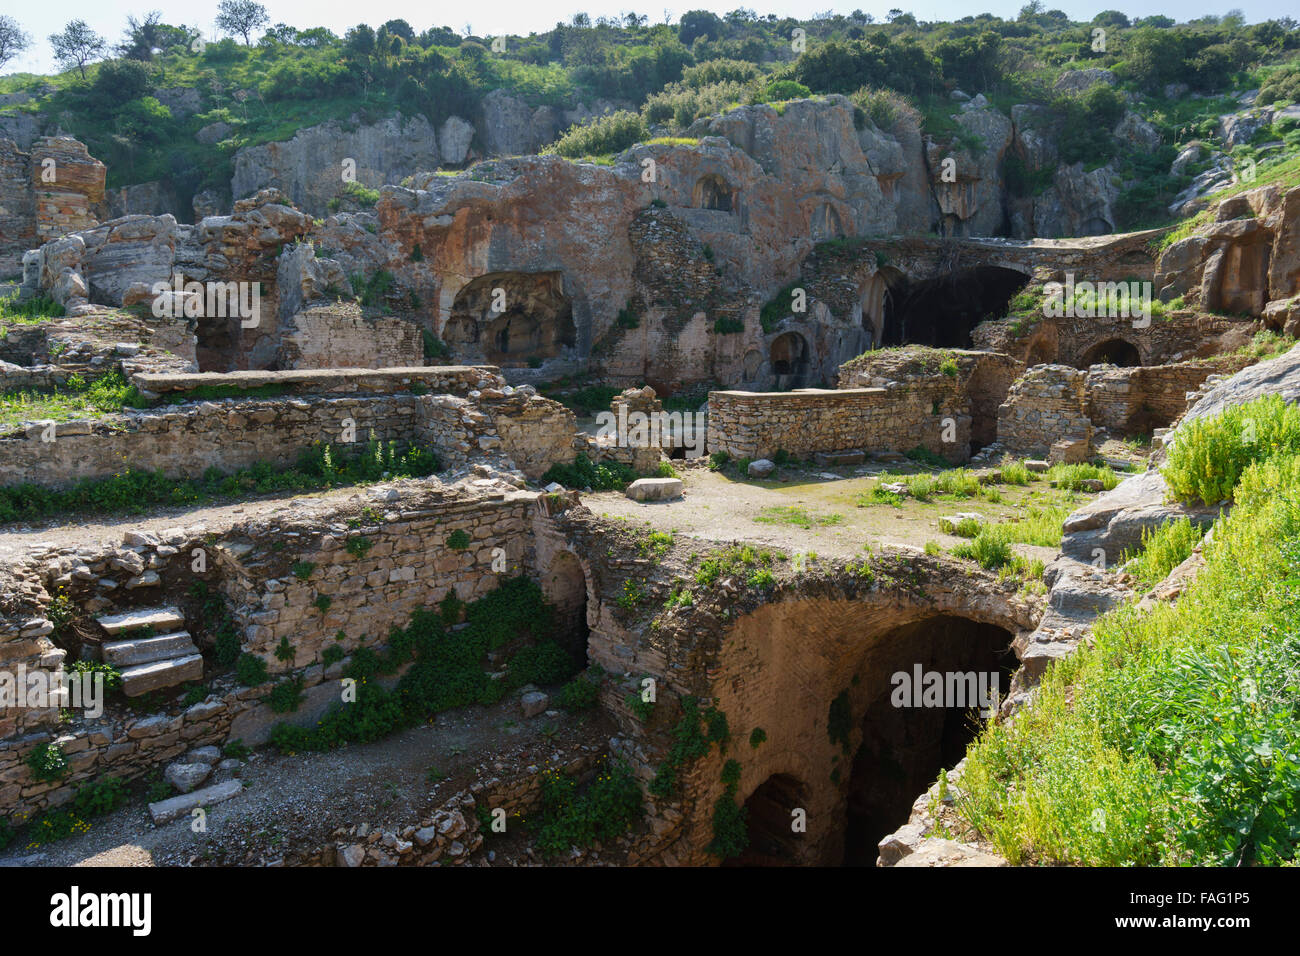 Turkey travel - at the Seven Sleepers, Yedi Uyuyanlar, ancient cave burial tomb site near Efes. Stock Photo